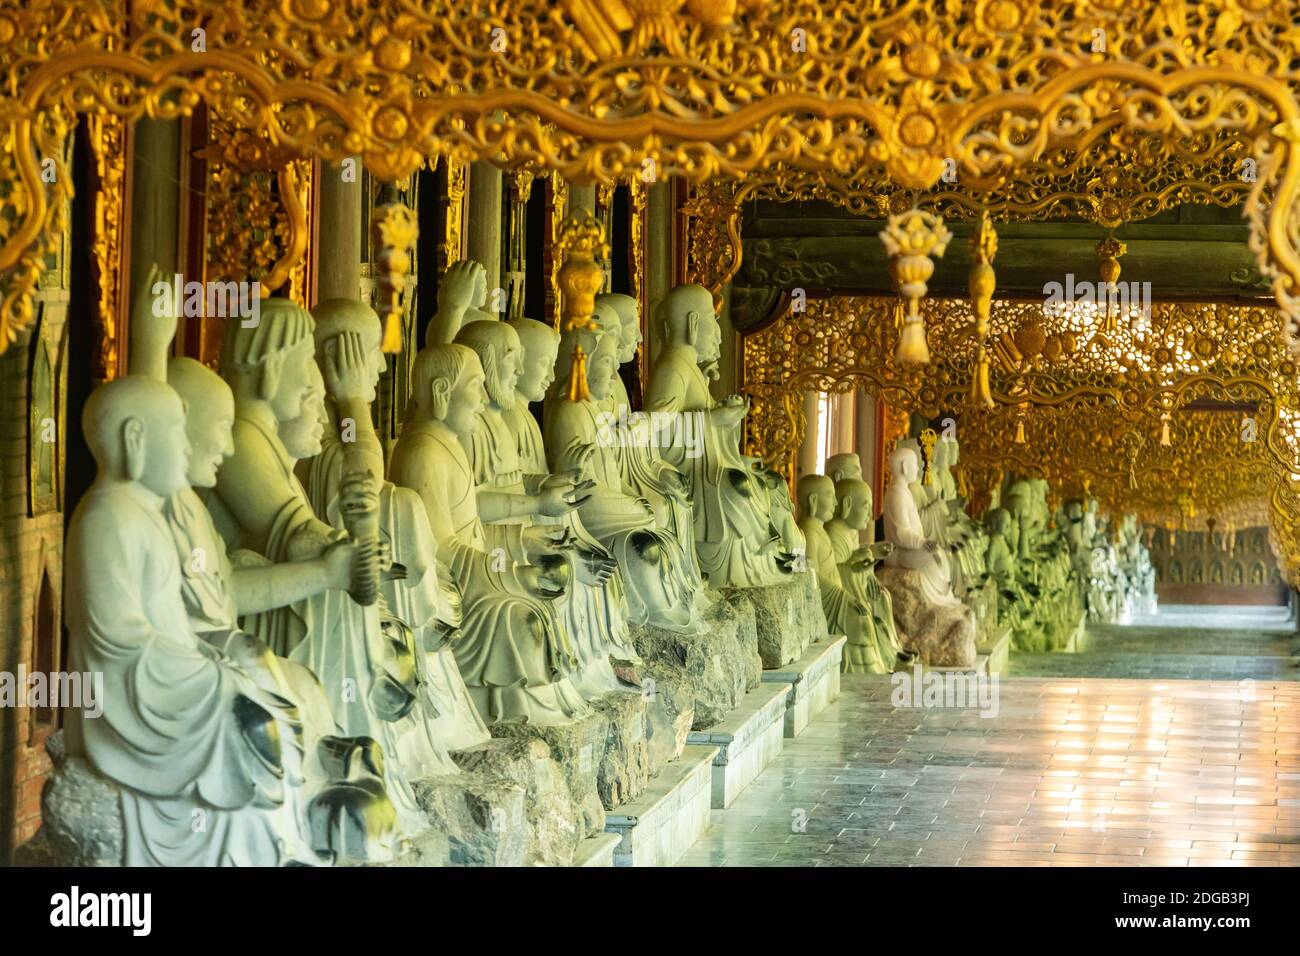 statues of buddha in different poses in bai dinh temple complex in ninh binh province vietnam 2DGB3PJ